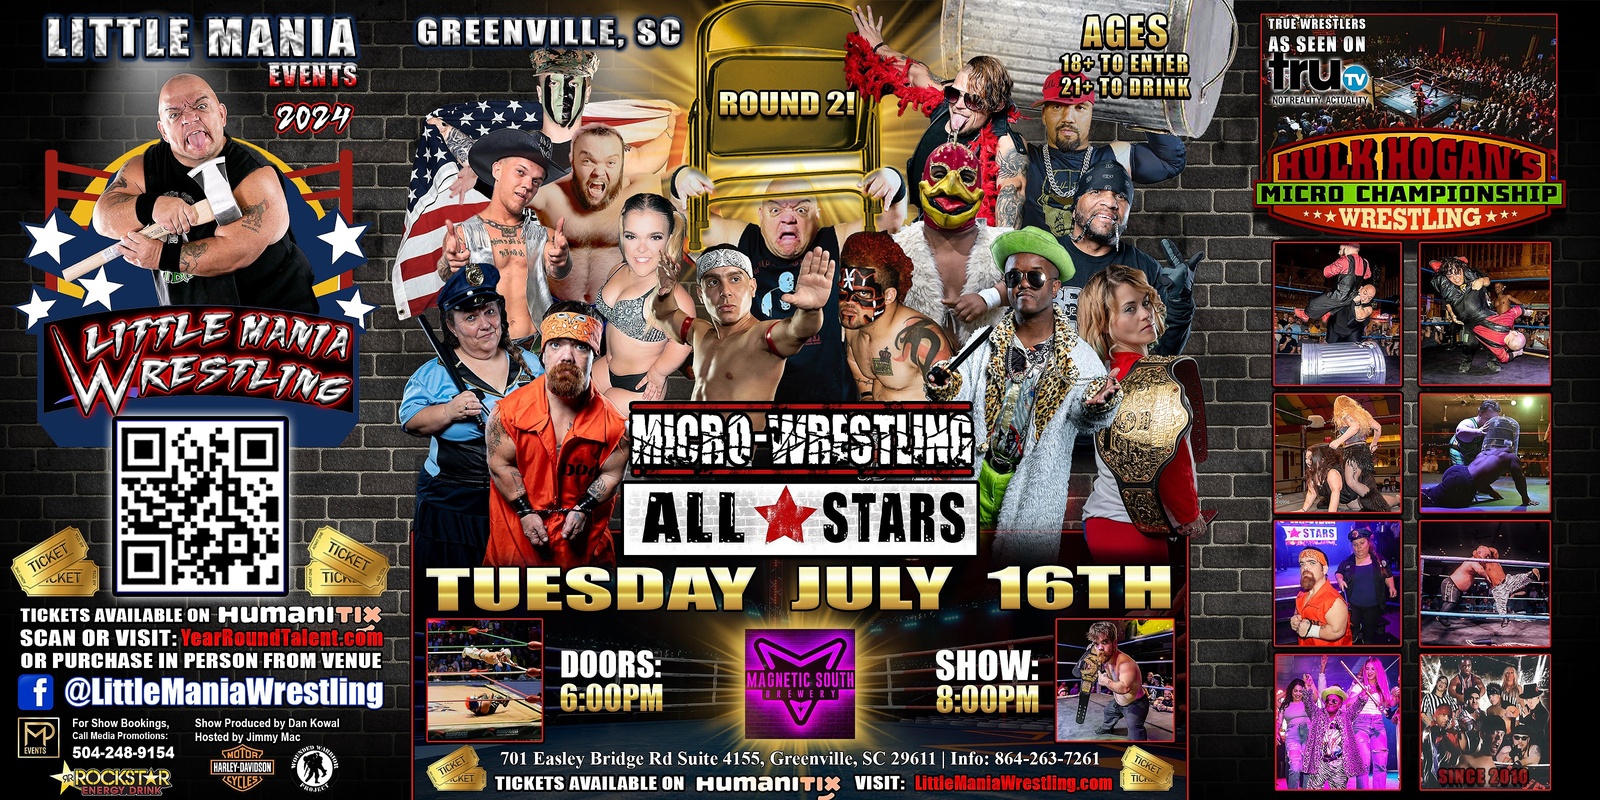 Banner image for Greenville, SC - Micro-Wrestling All * Stars: ROUND 2! "Little Mania Rips Through The Ring!"